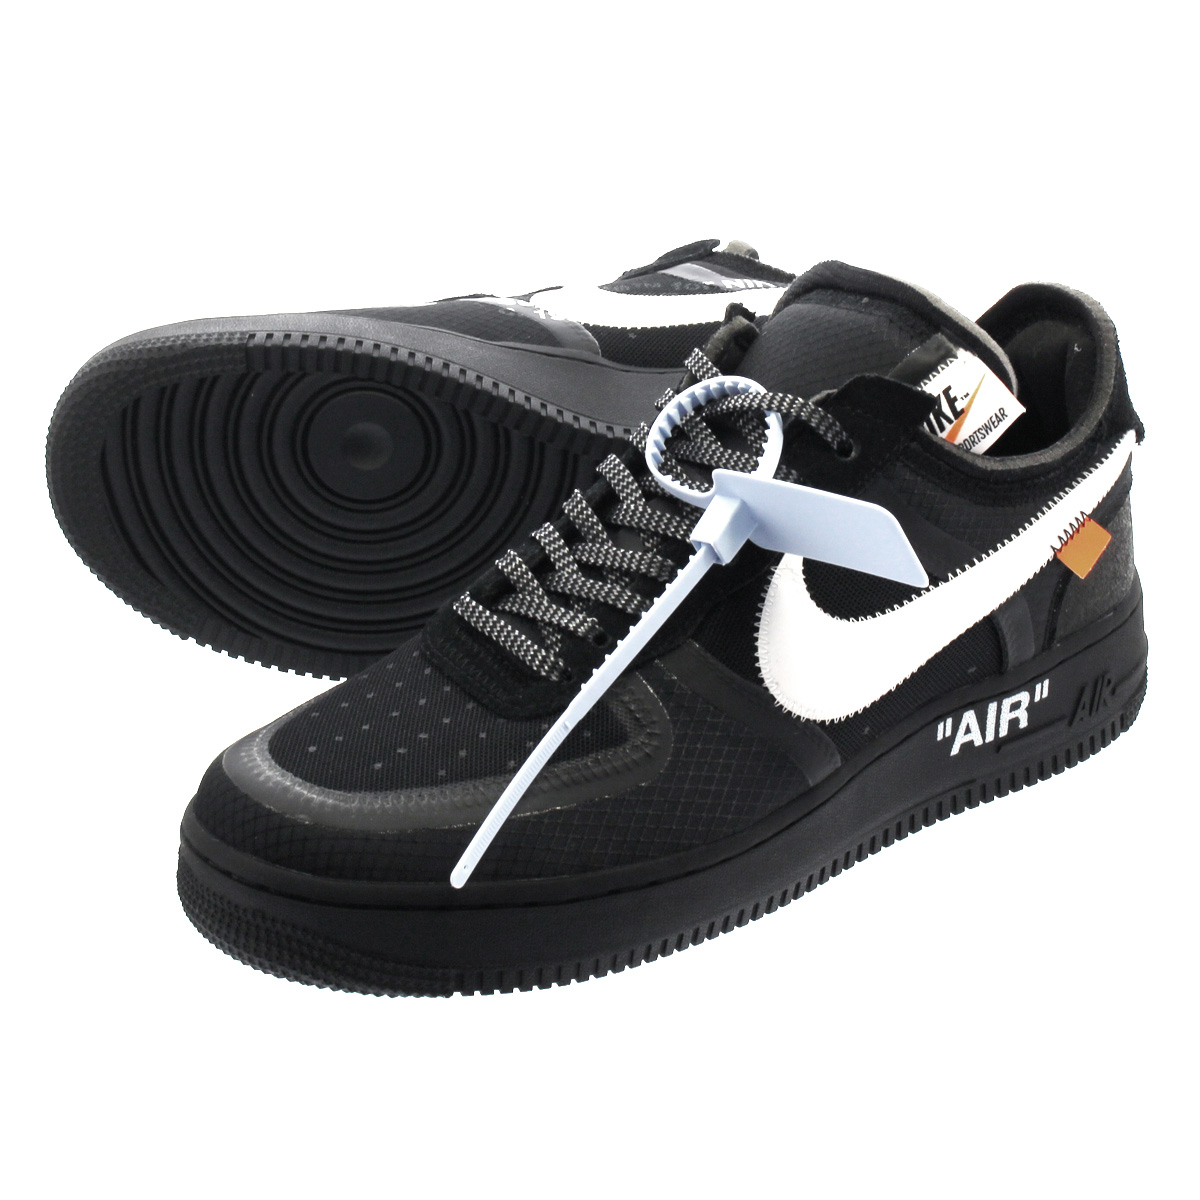 nike air force low off white black